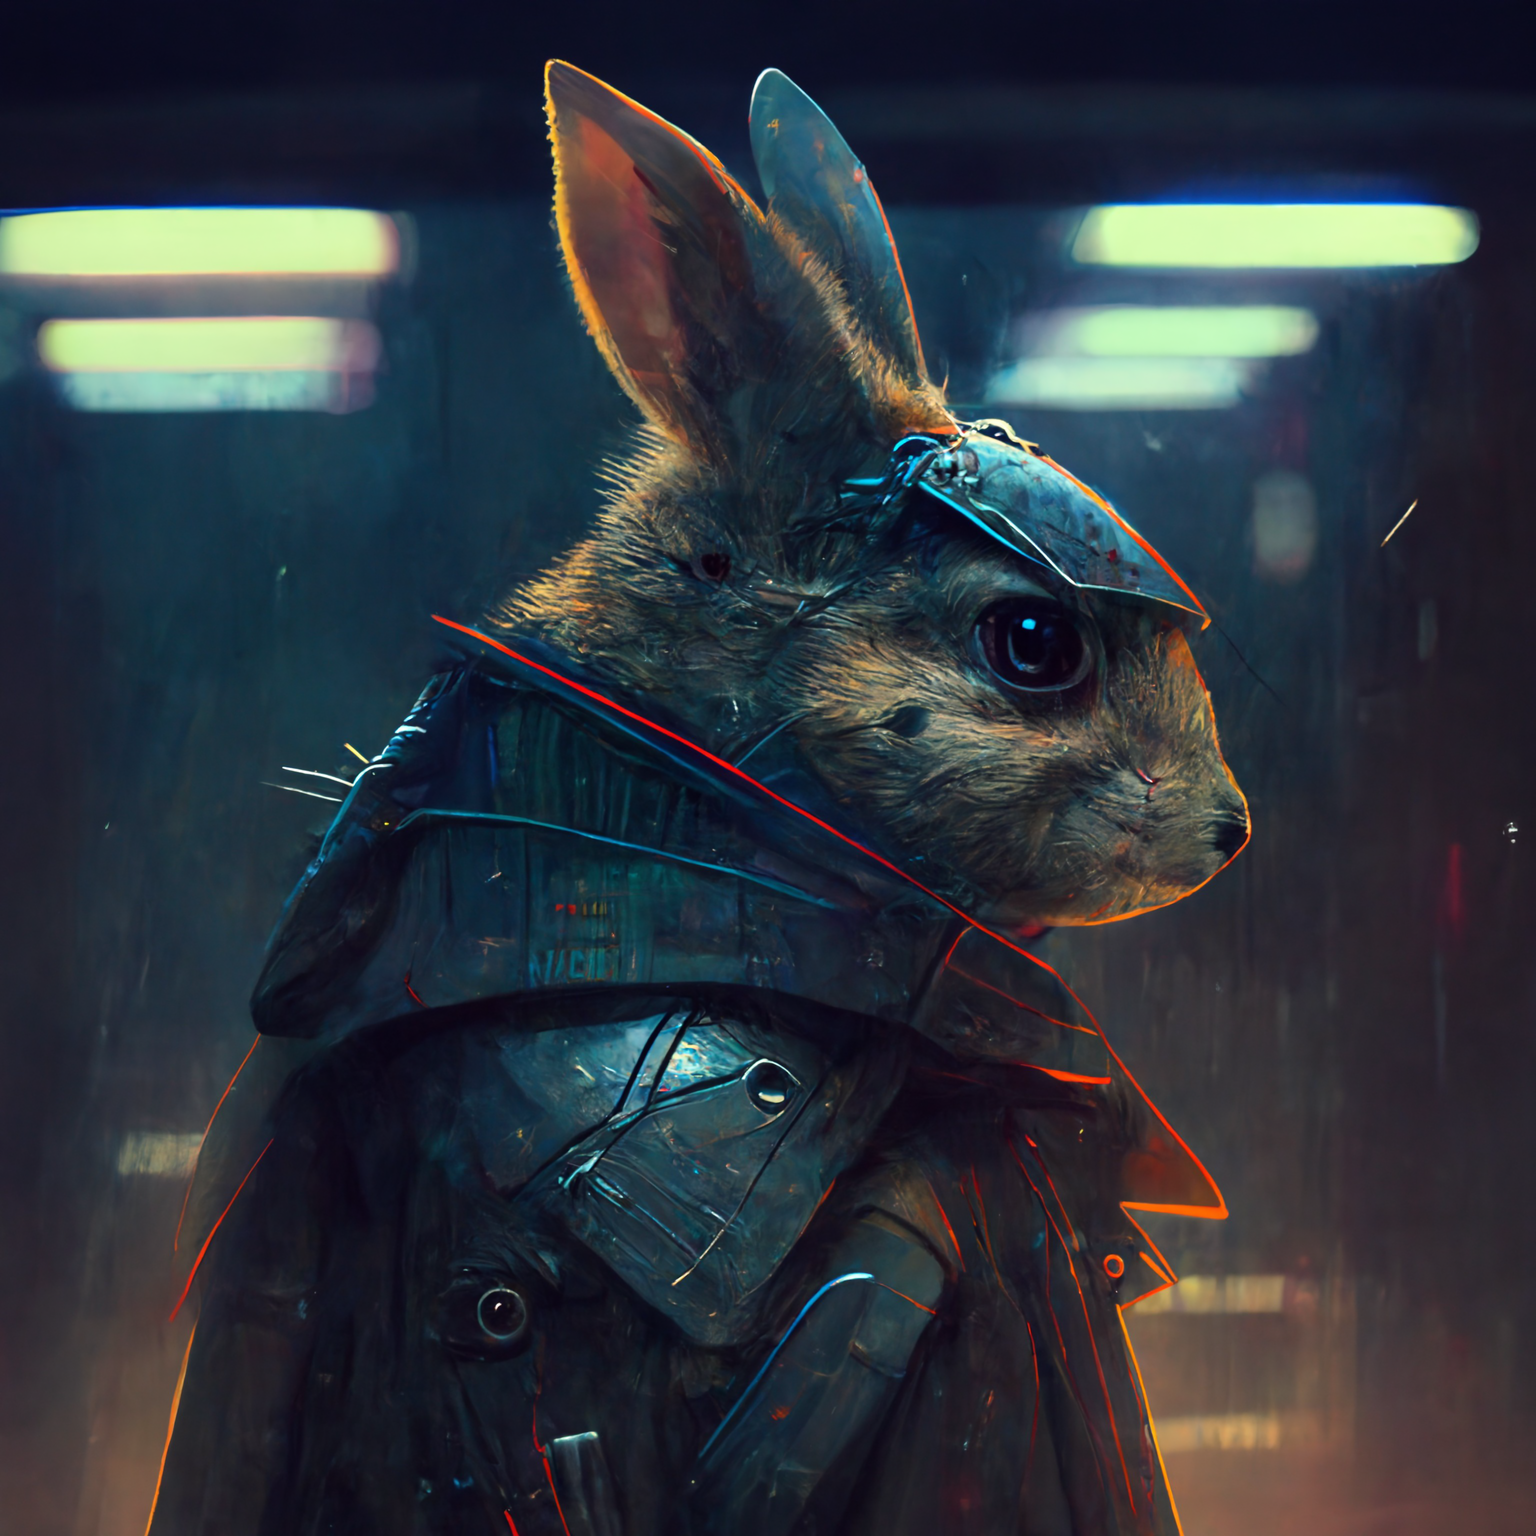 A Rabbit In A Blade Runner Style